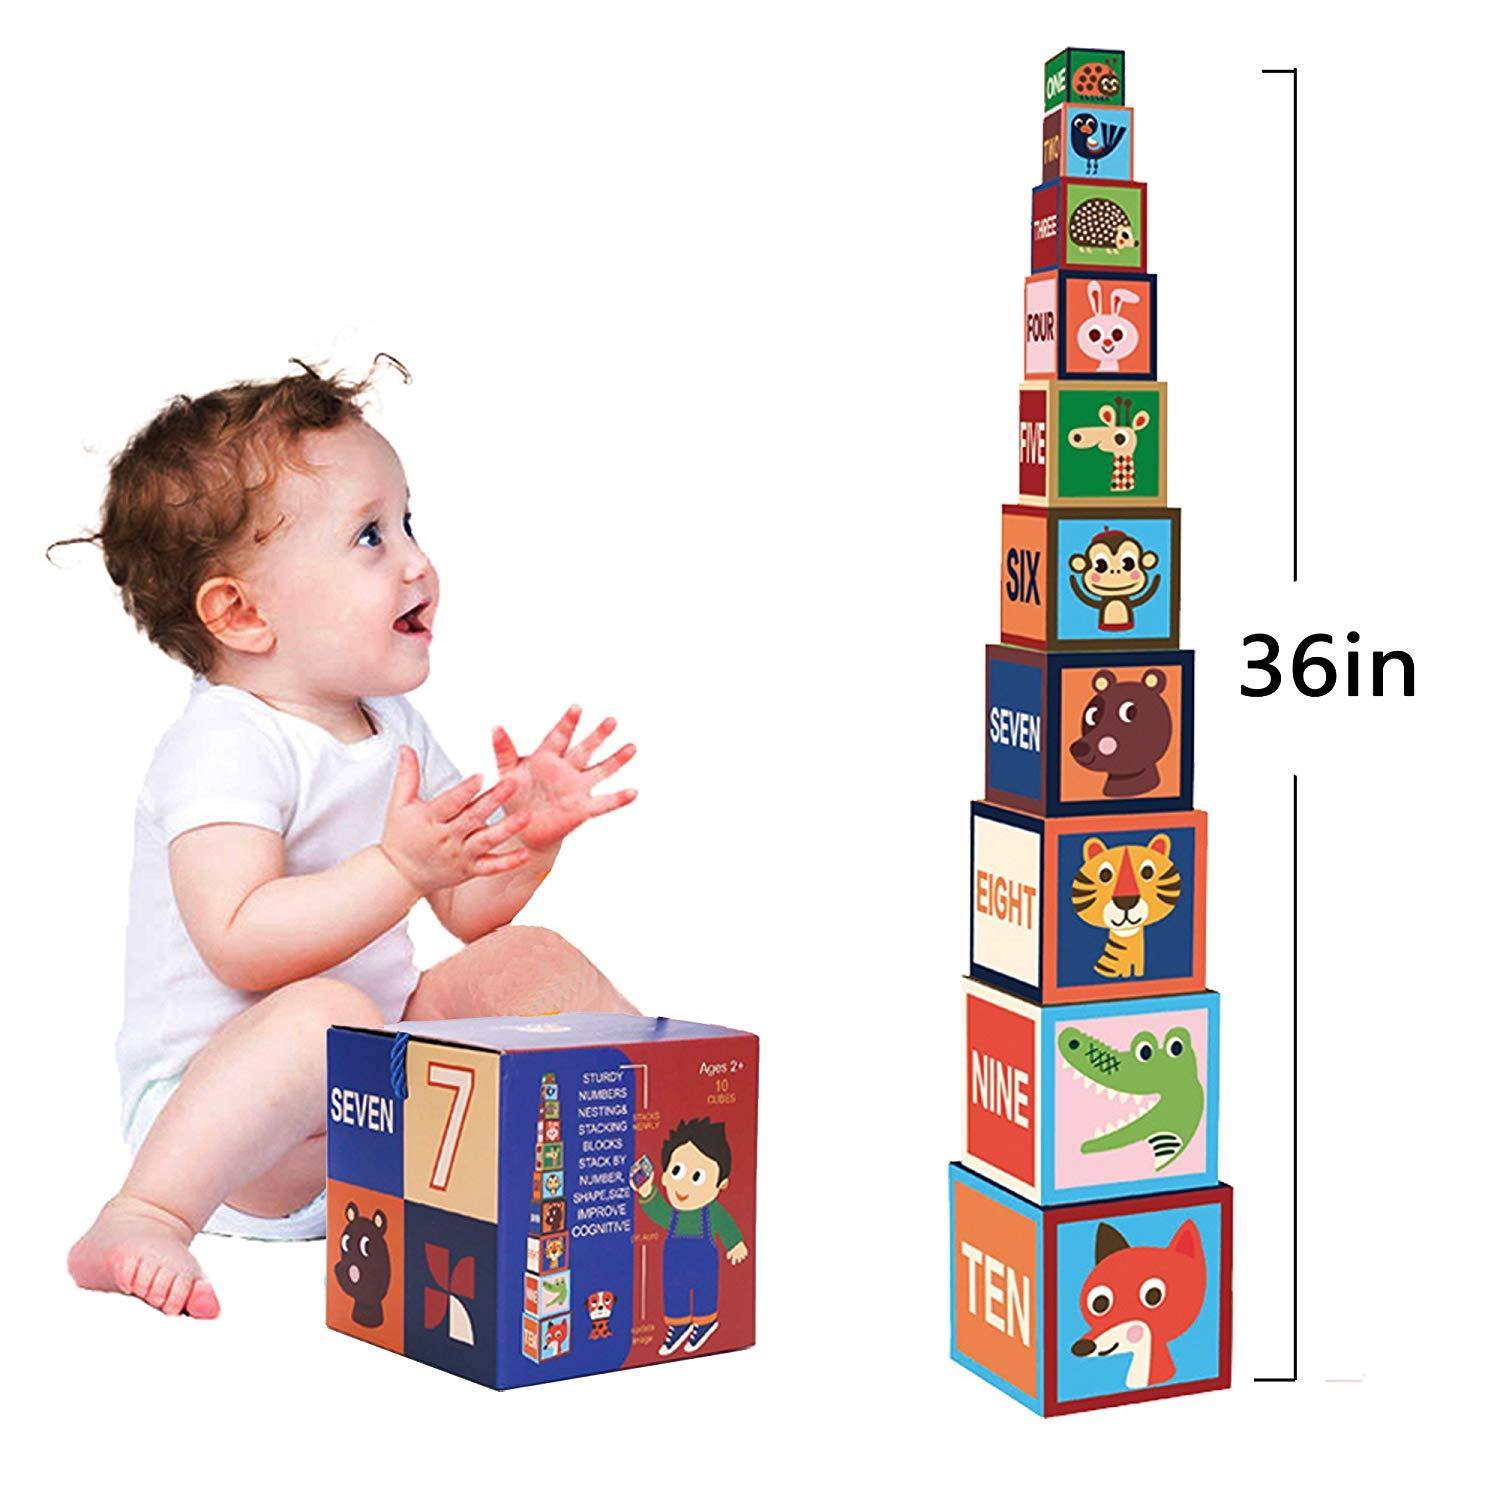 Bosonshop 10 Pieces Nesting Blocks Stacking Cube Boxes Educational Number Block for Kids Educational Toy